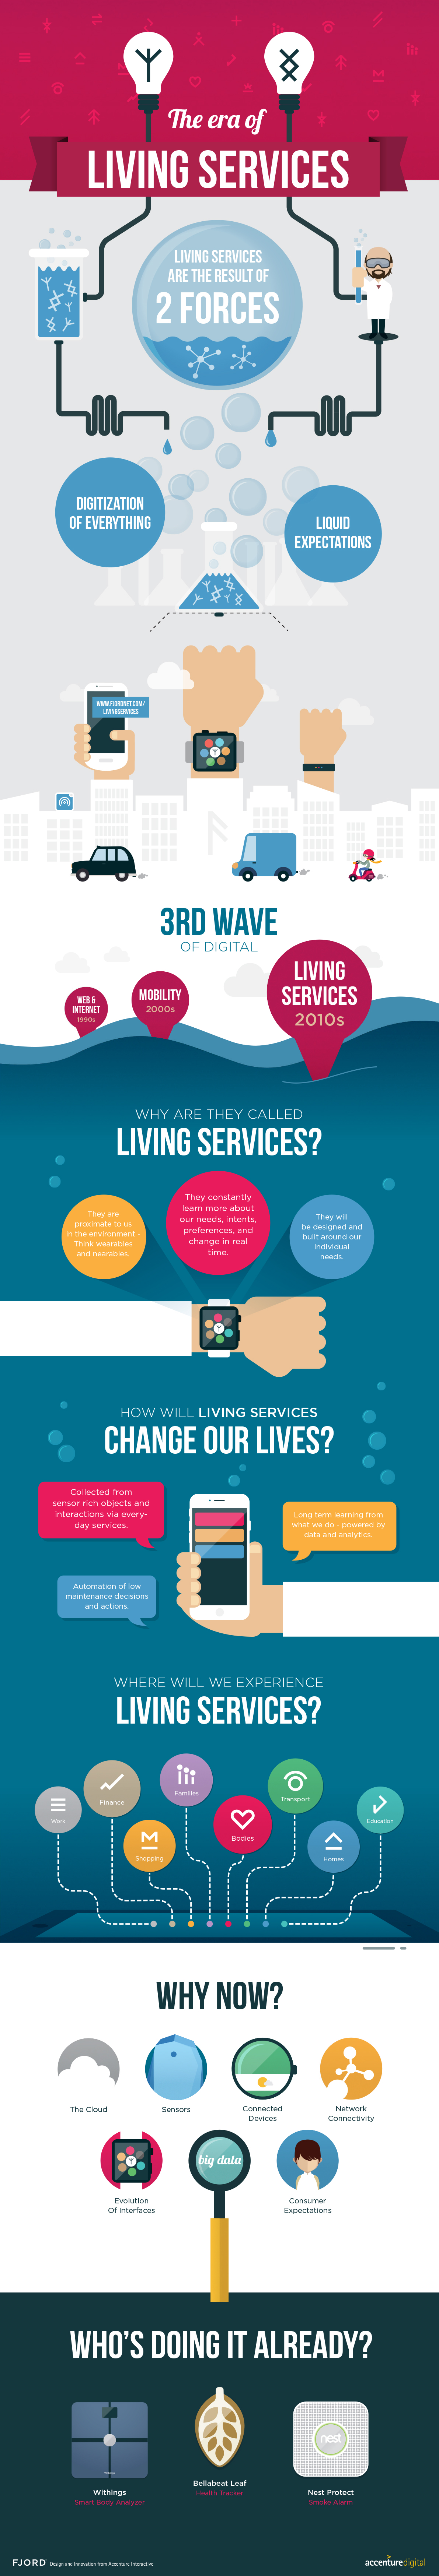 Living-Services-Infographic